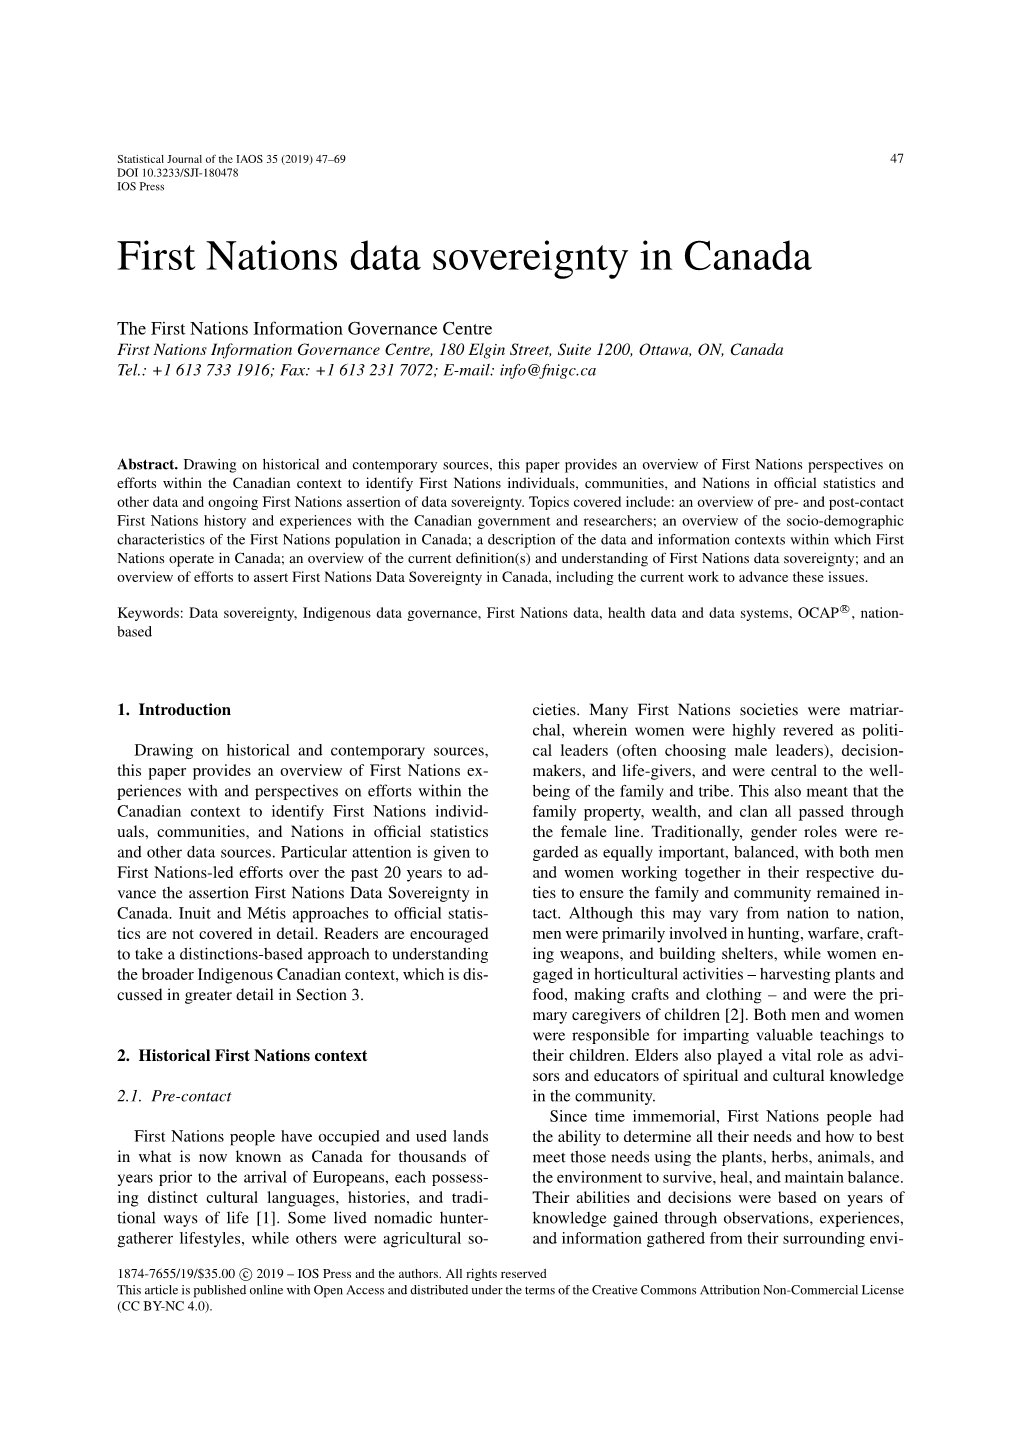 First Nations Data Sovereignty in Canada